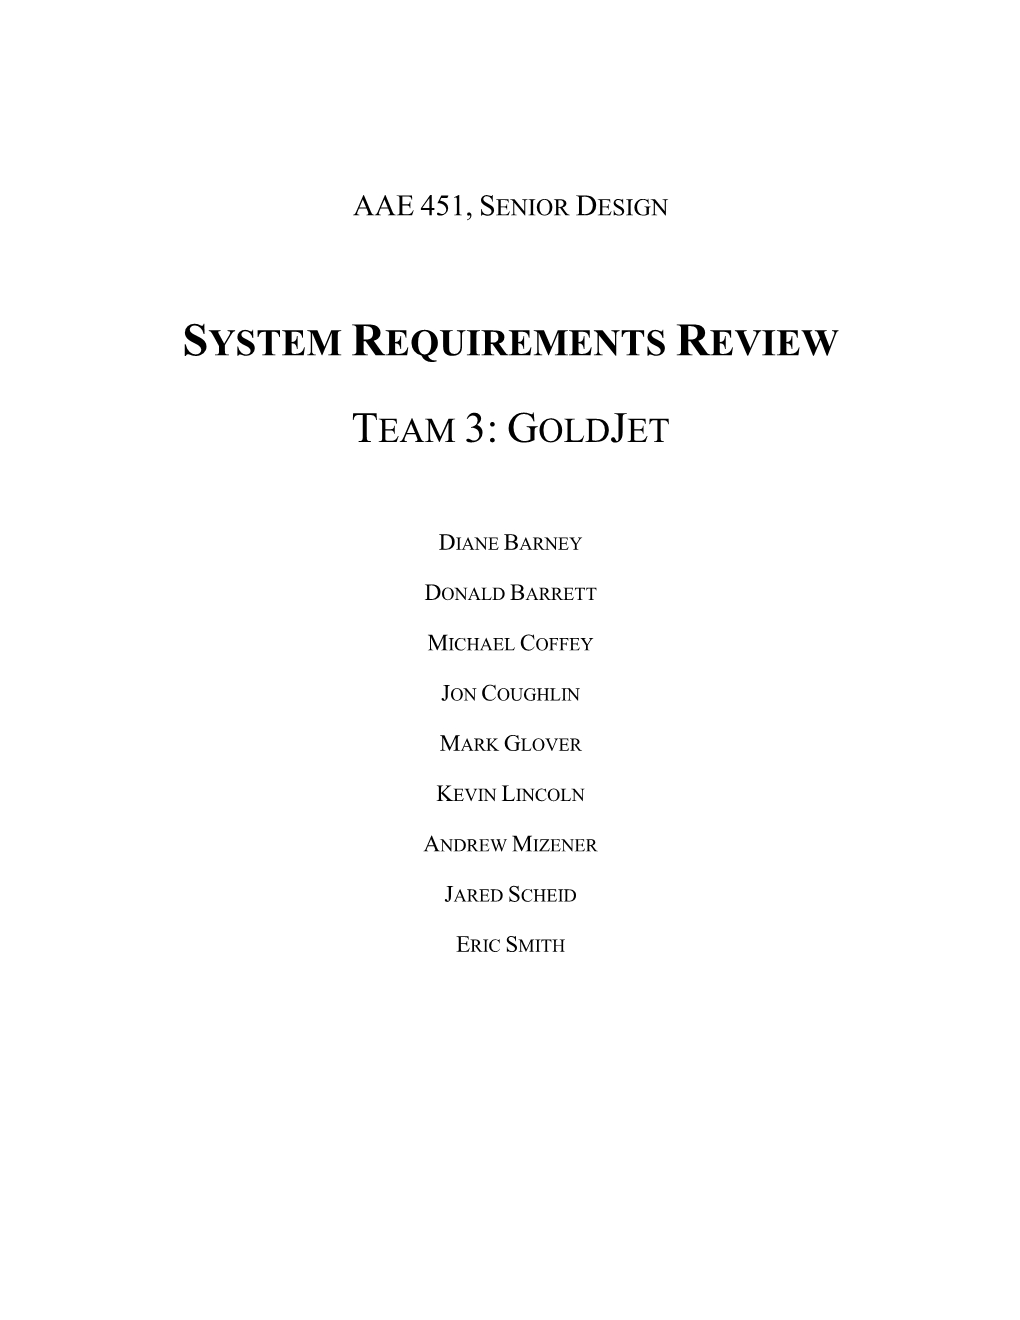 System Requirements Review